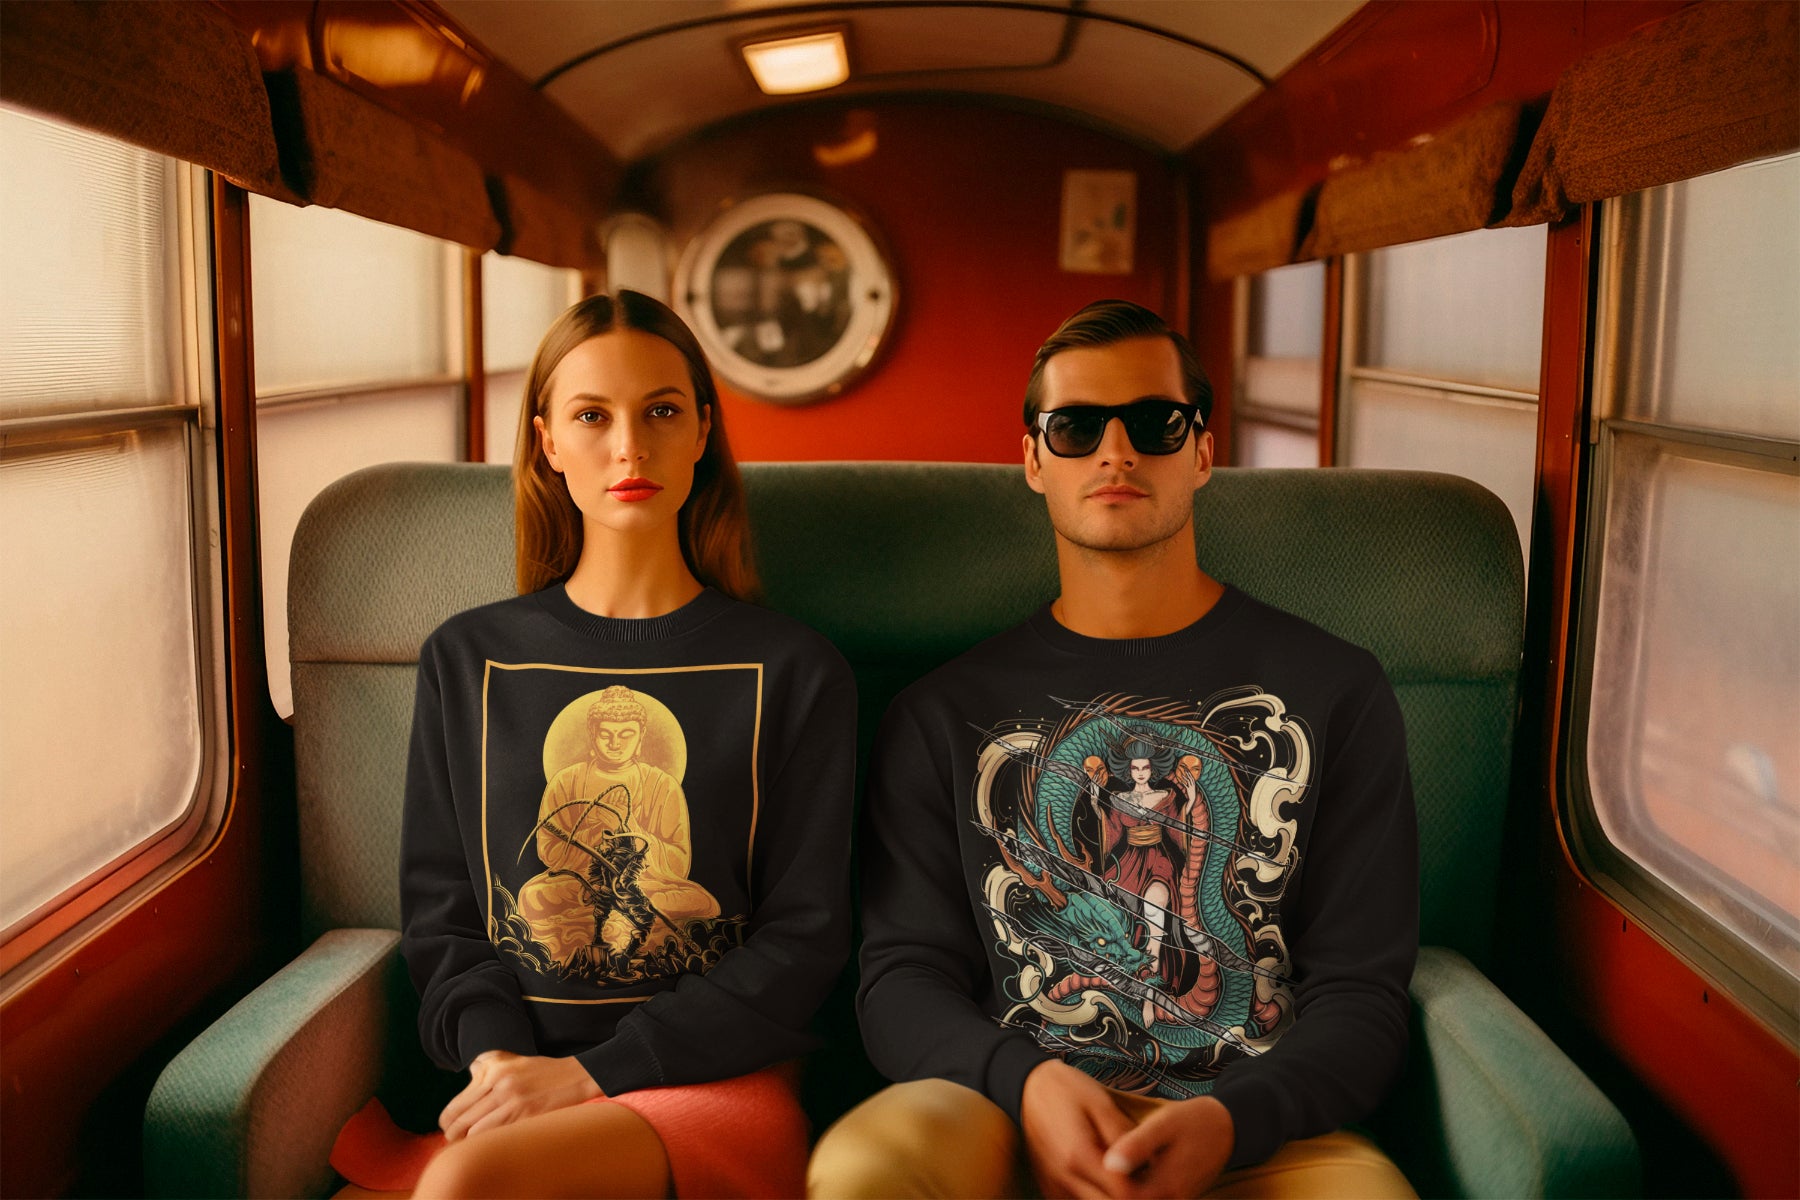 sweatshirt-mockup-of-a-couple-sitting-on-a-train-inspired-by-a-wes-anderson-film